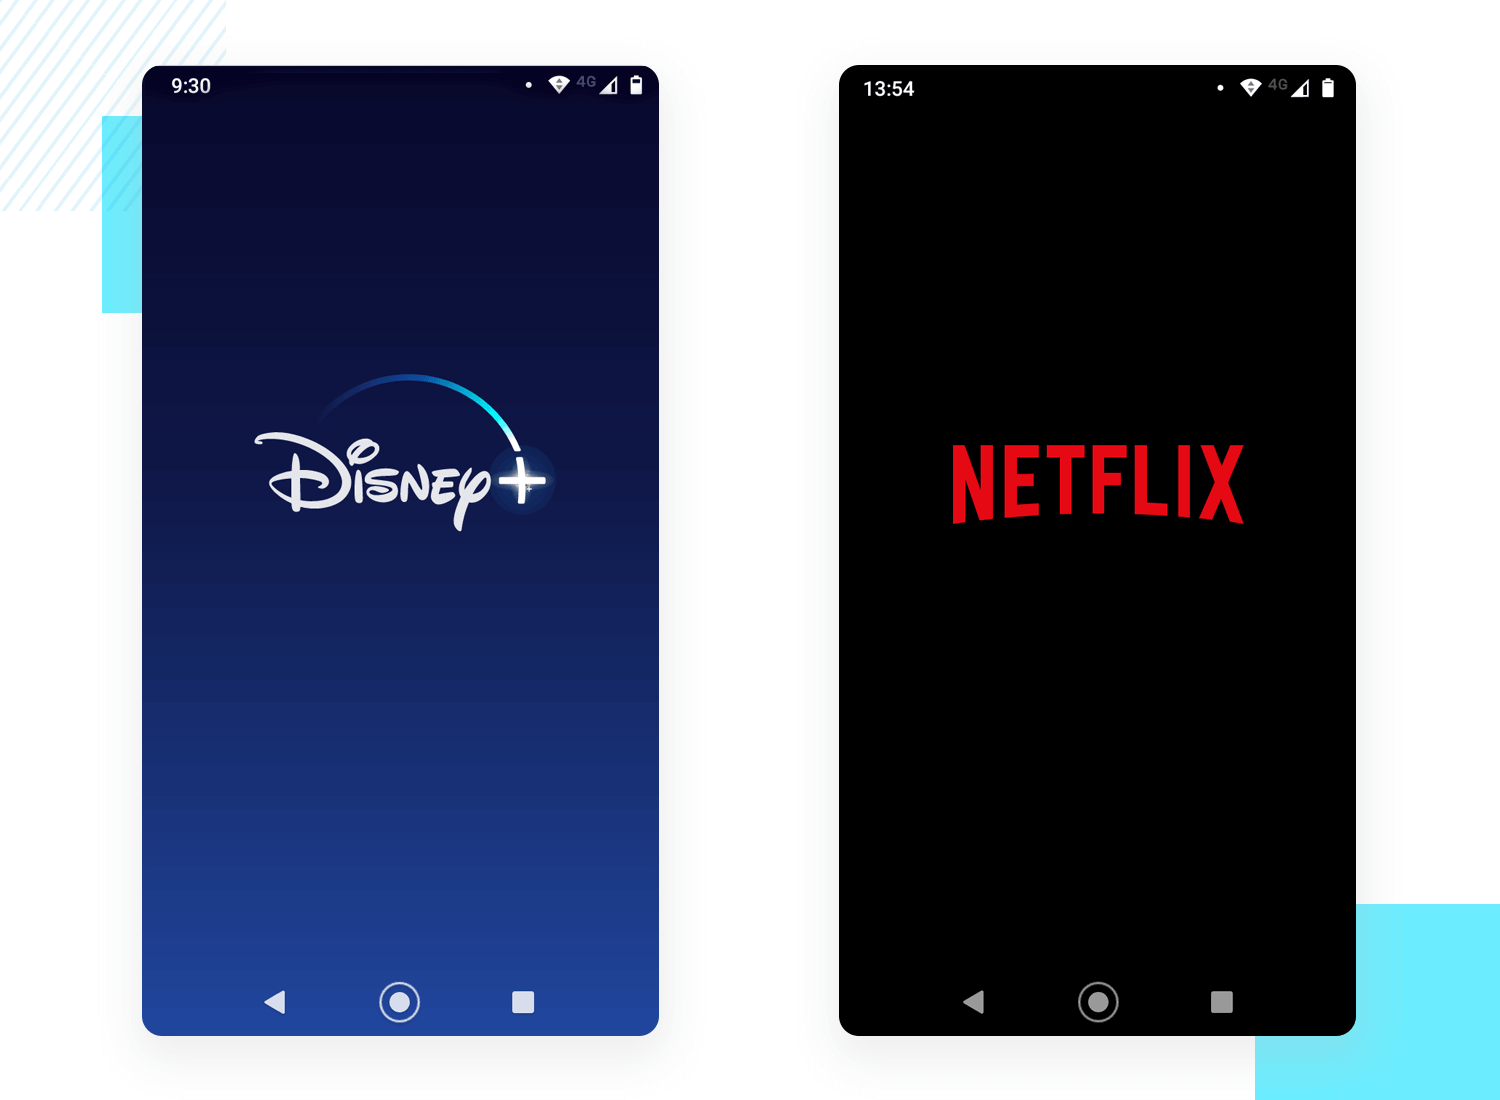 splash screen designs by streaming services disney+ and netflix